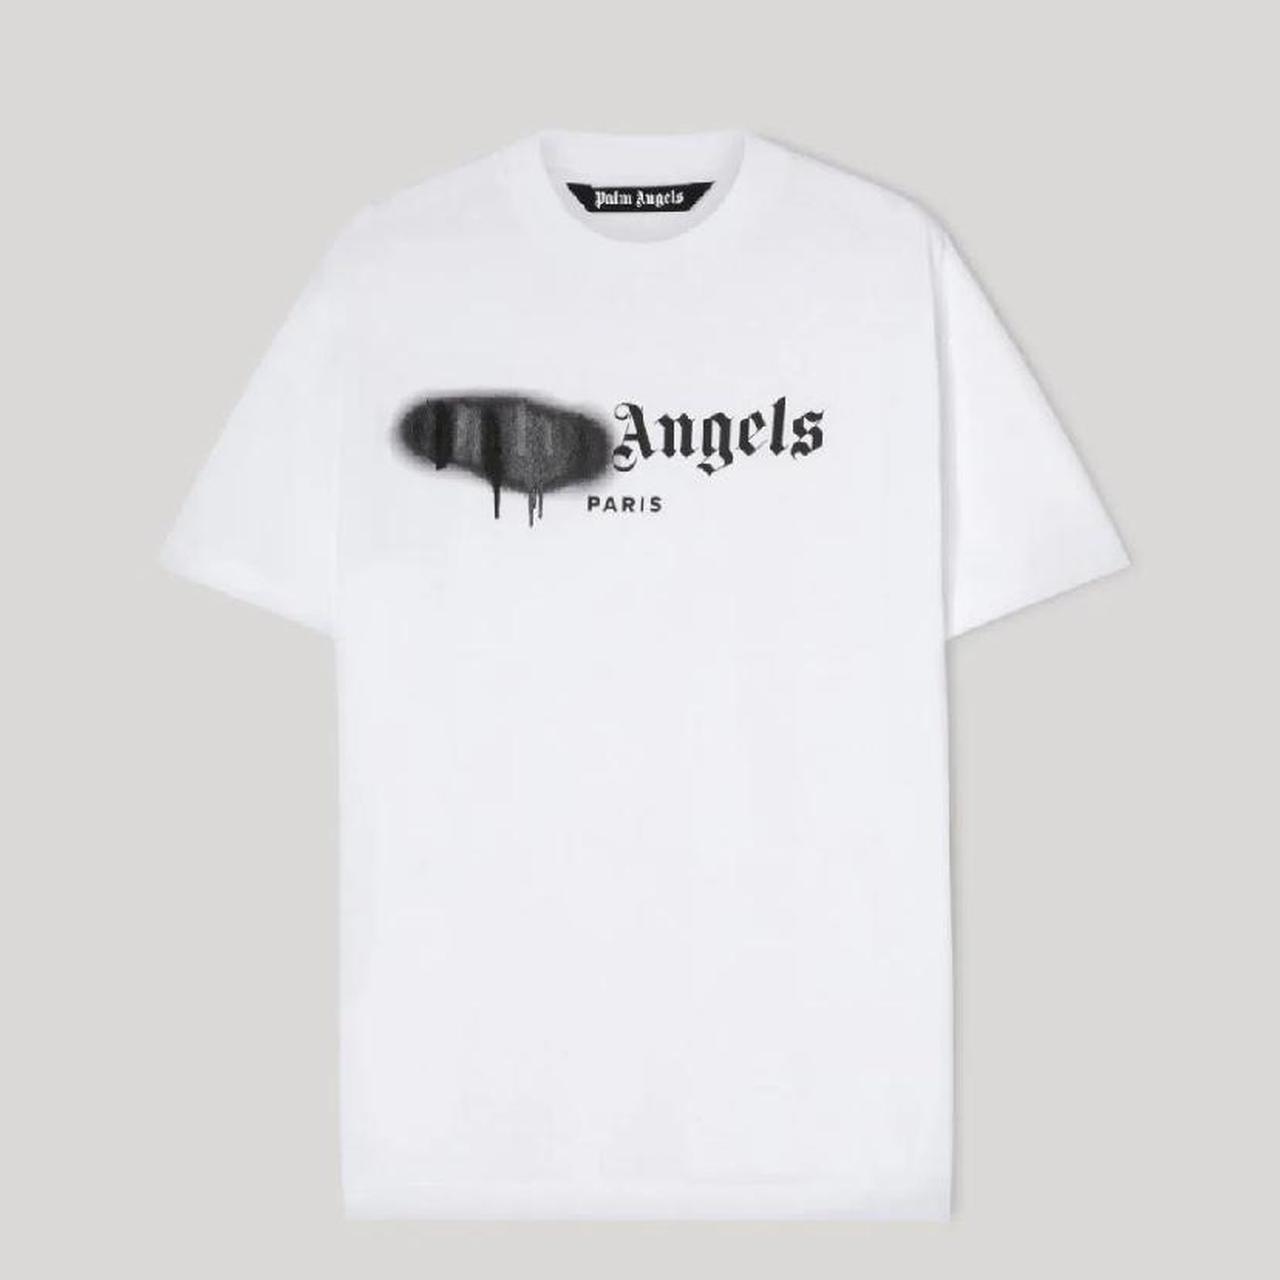 palm angles exclusive Paris tee // message before... - Depop